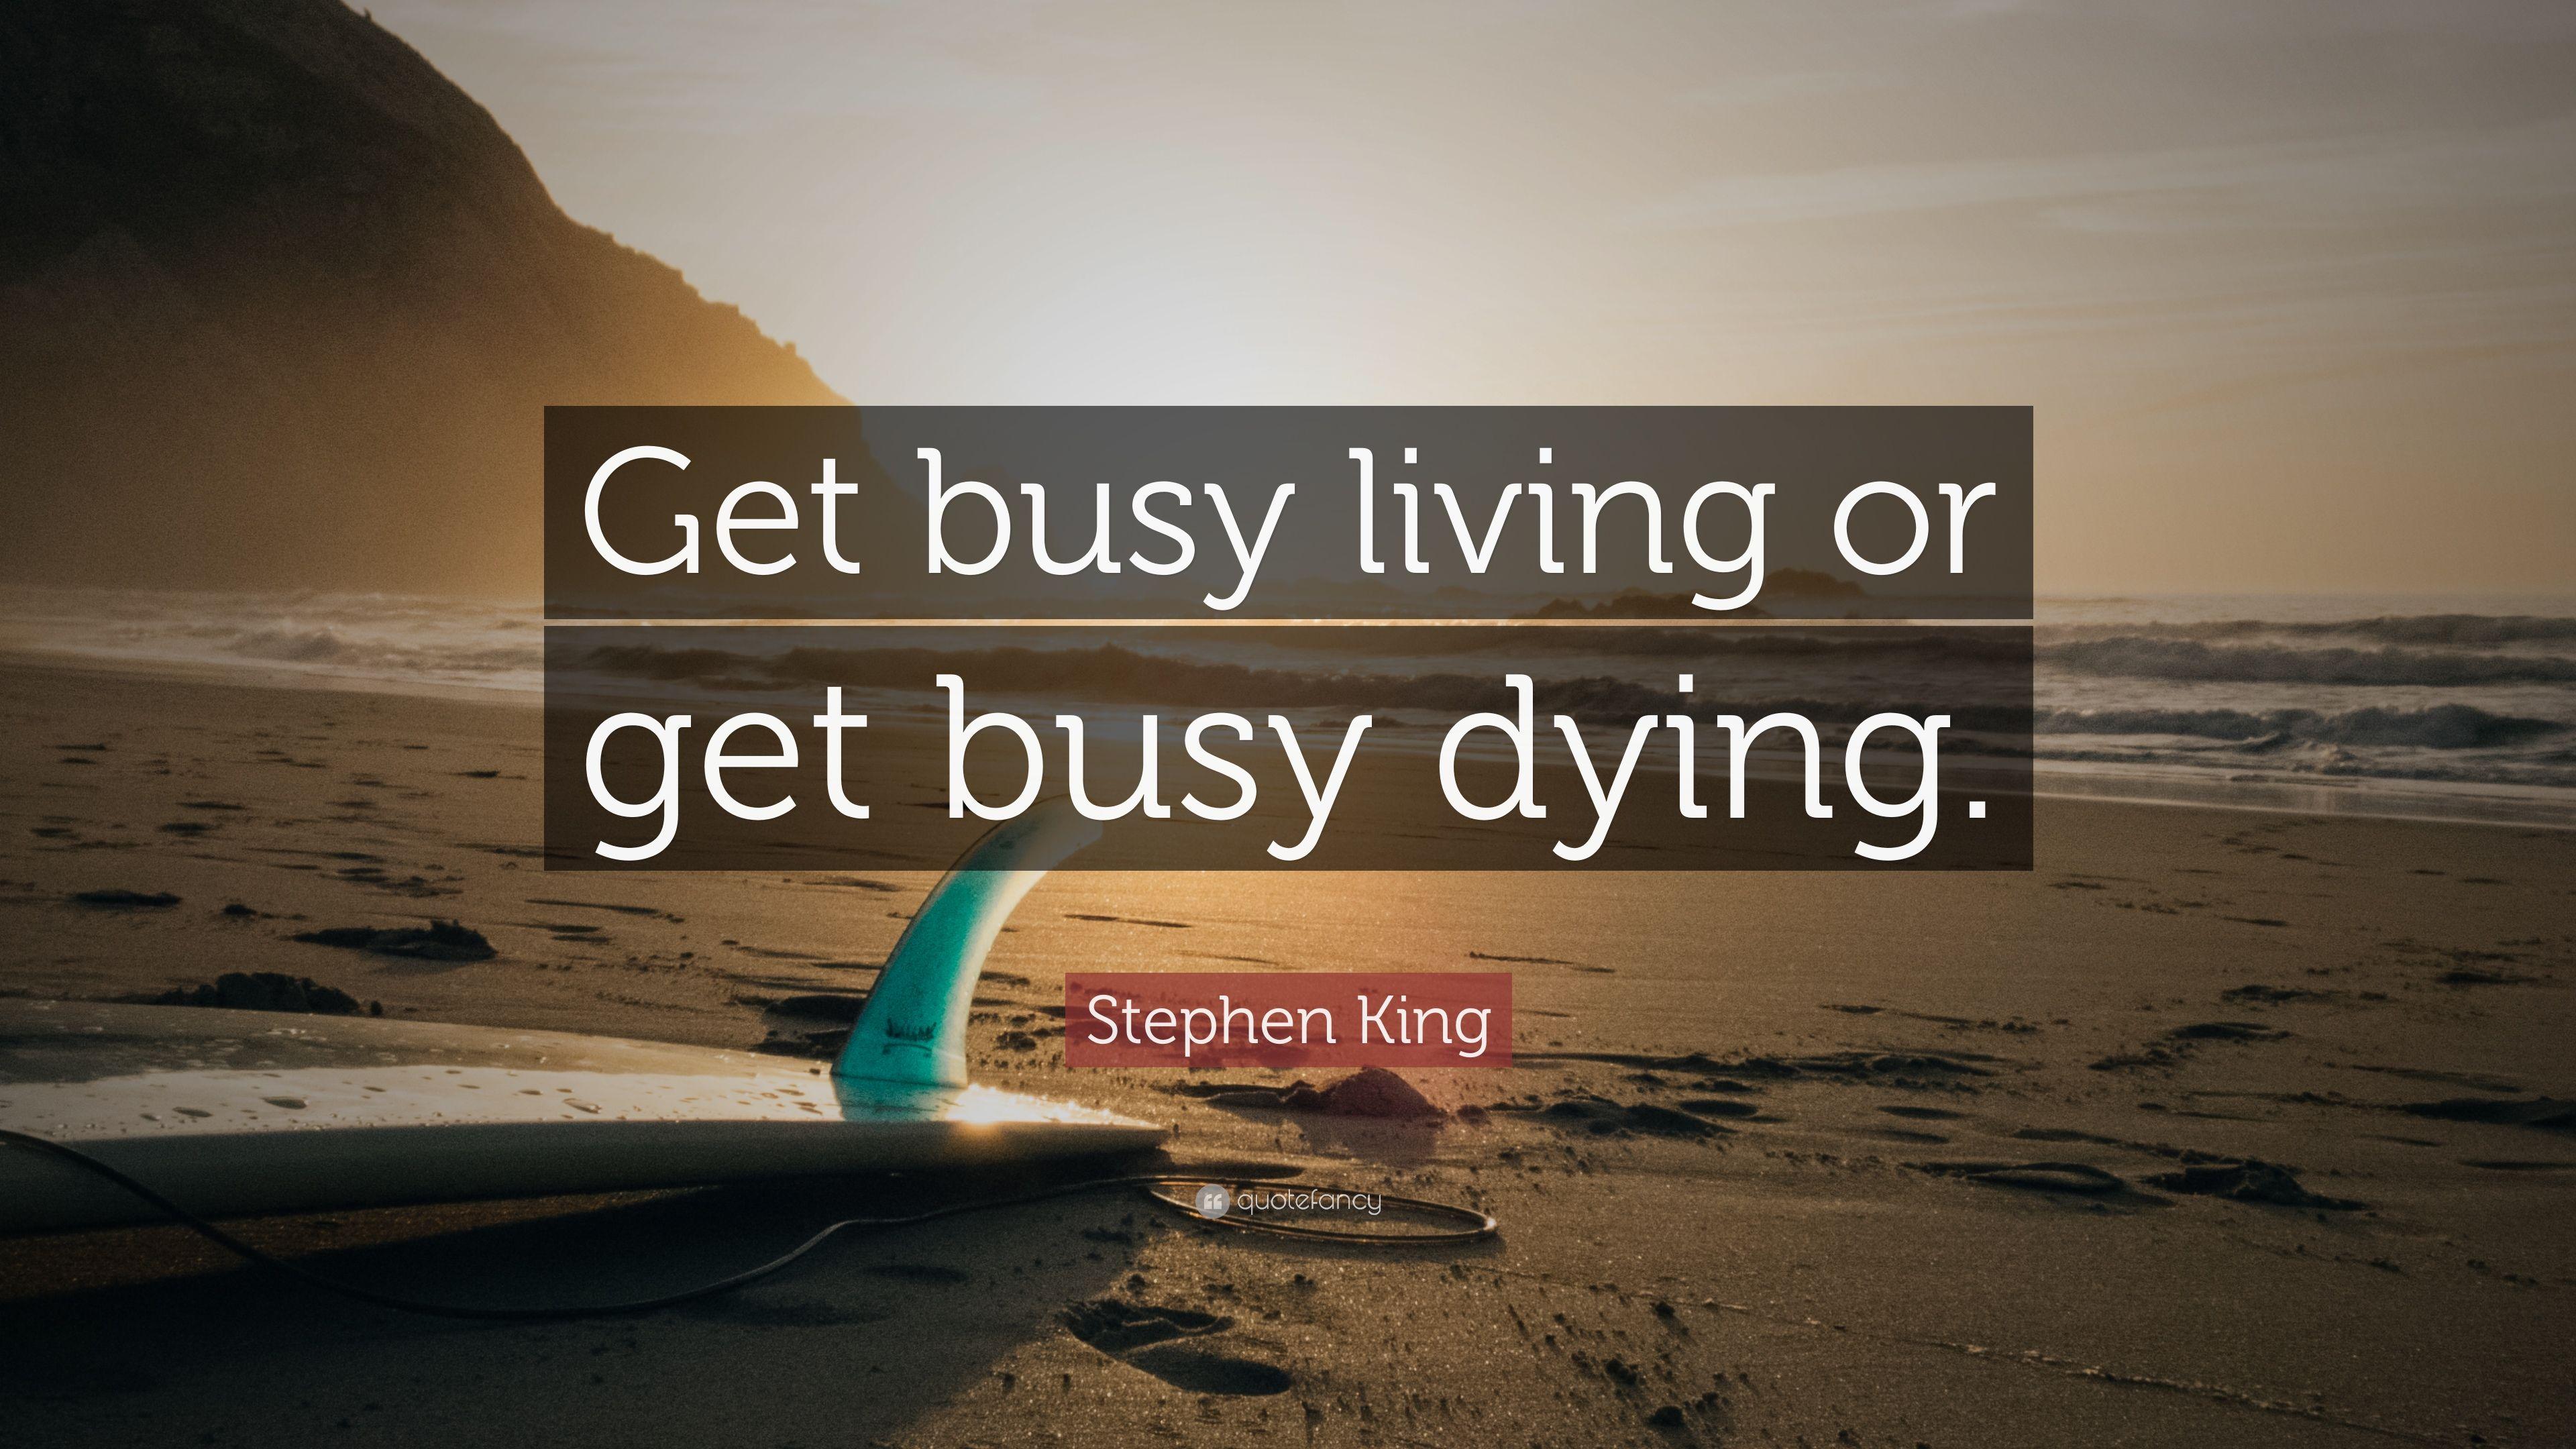 Stephen King Quote: “Get busy living or get busy dying.” 24